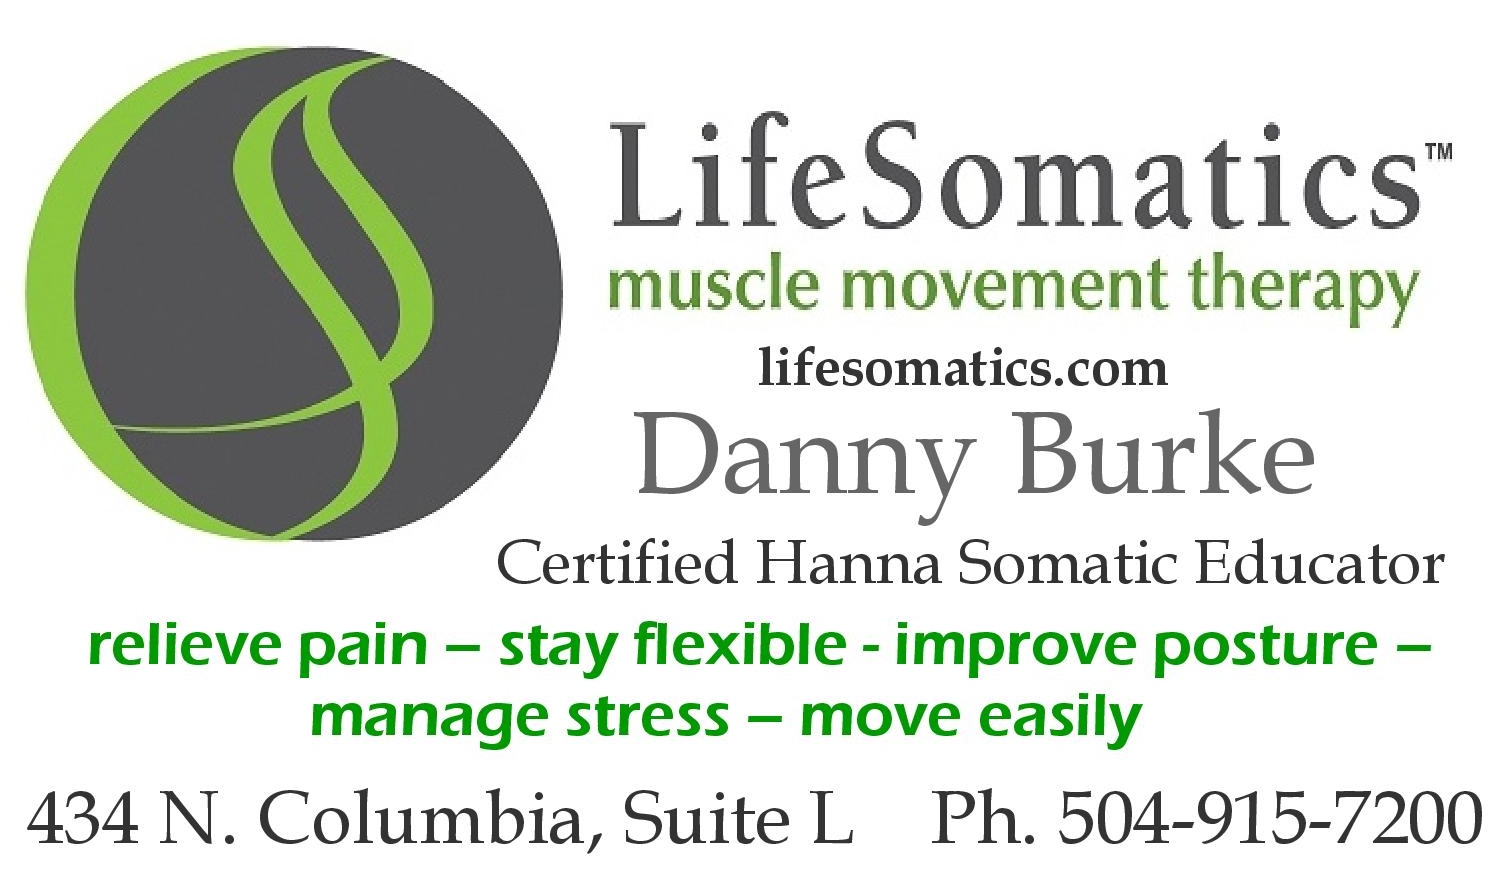 Save $25 Off Initial Consultation With Life Somatics Through June